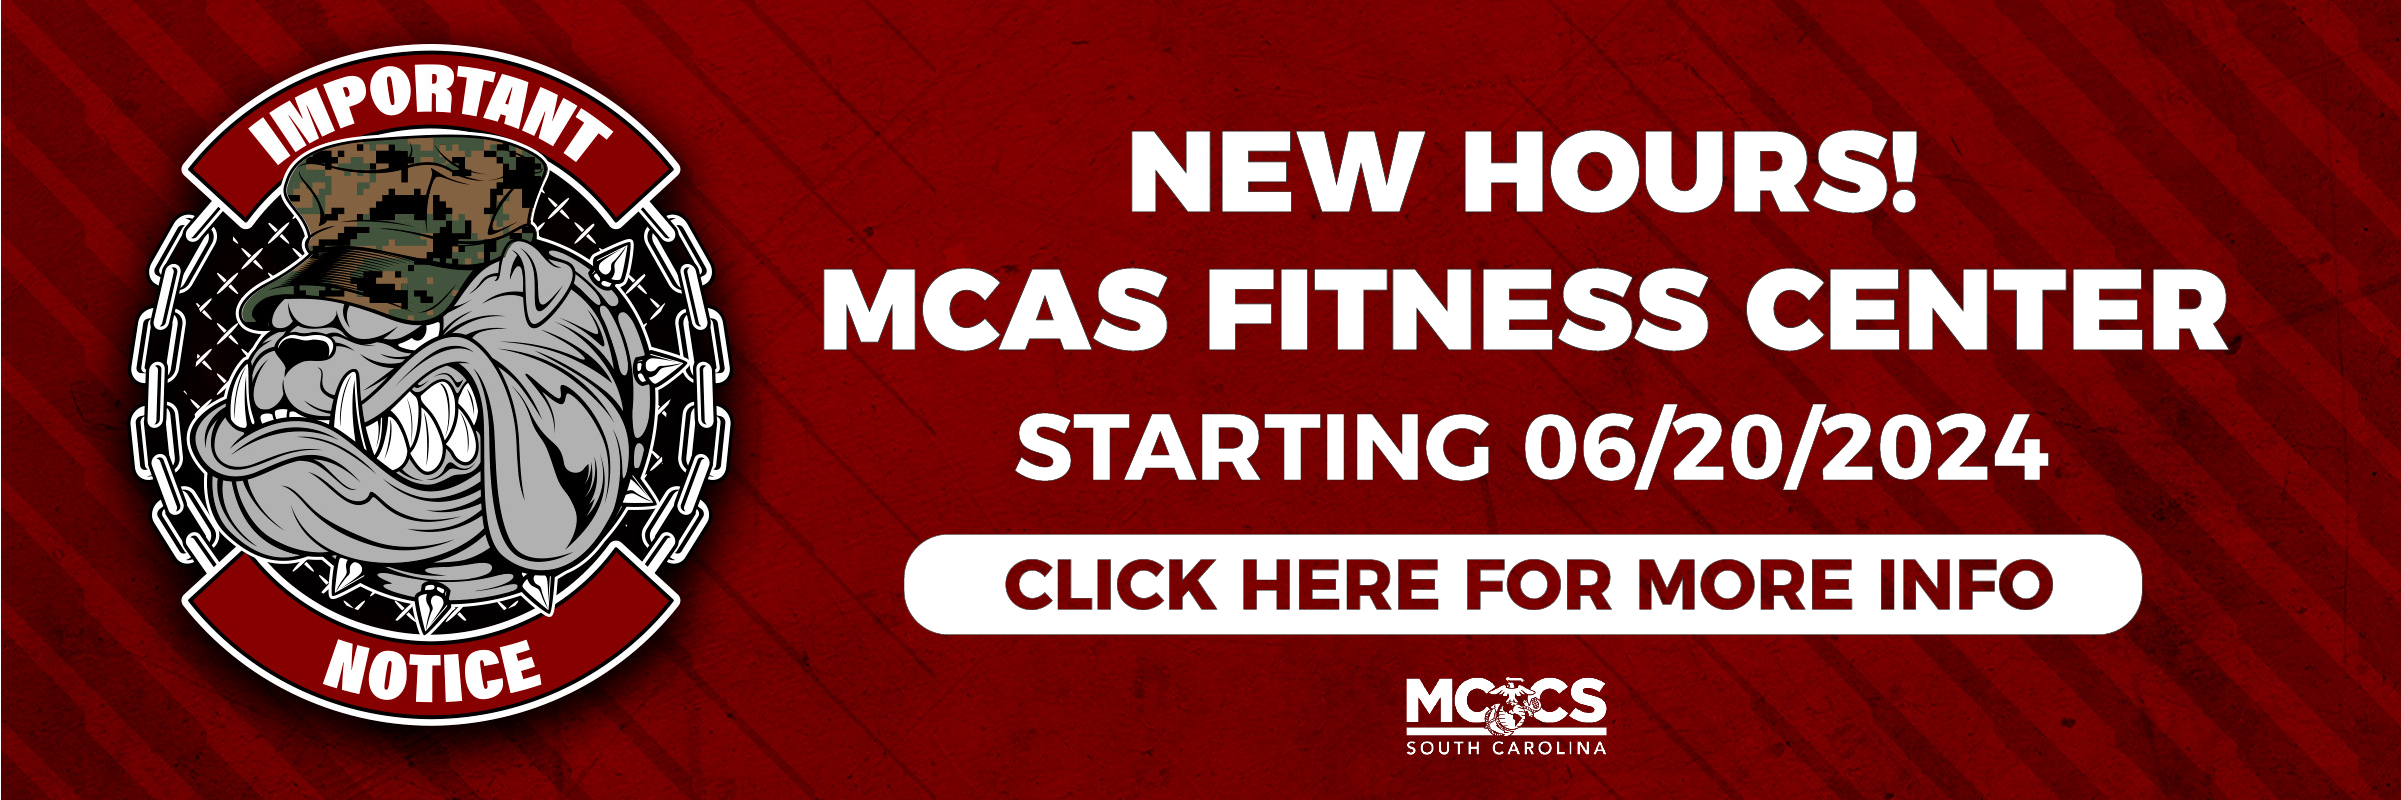 NEW HOURS MCAS Fitness Center_WEB.png